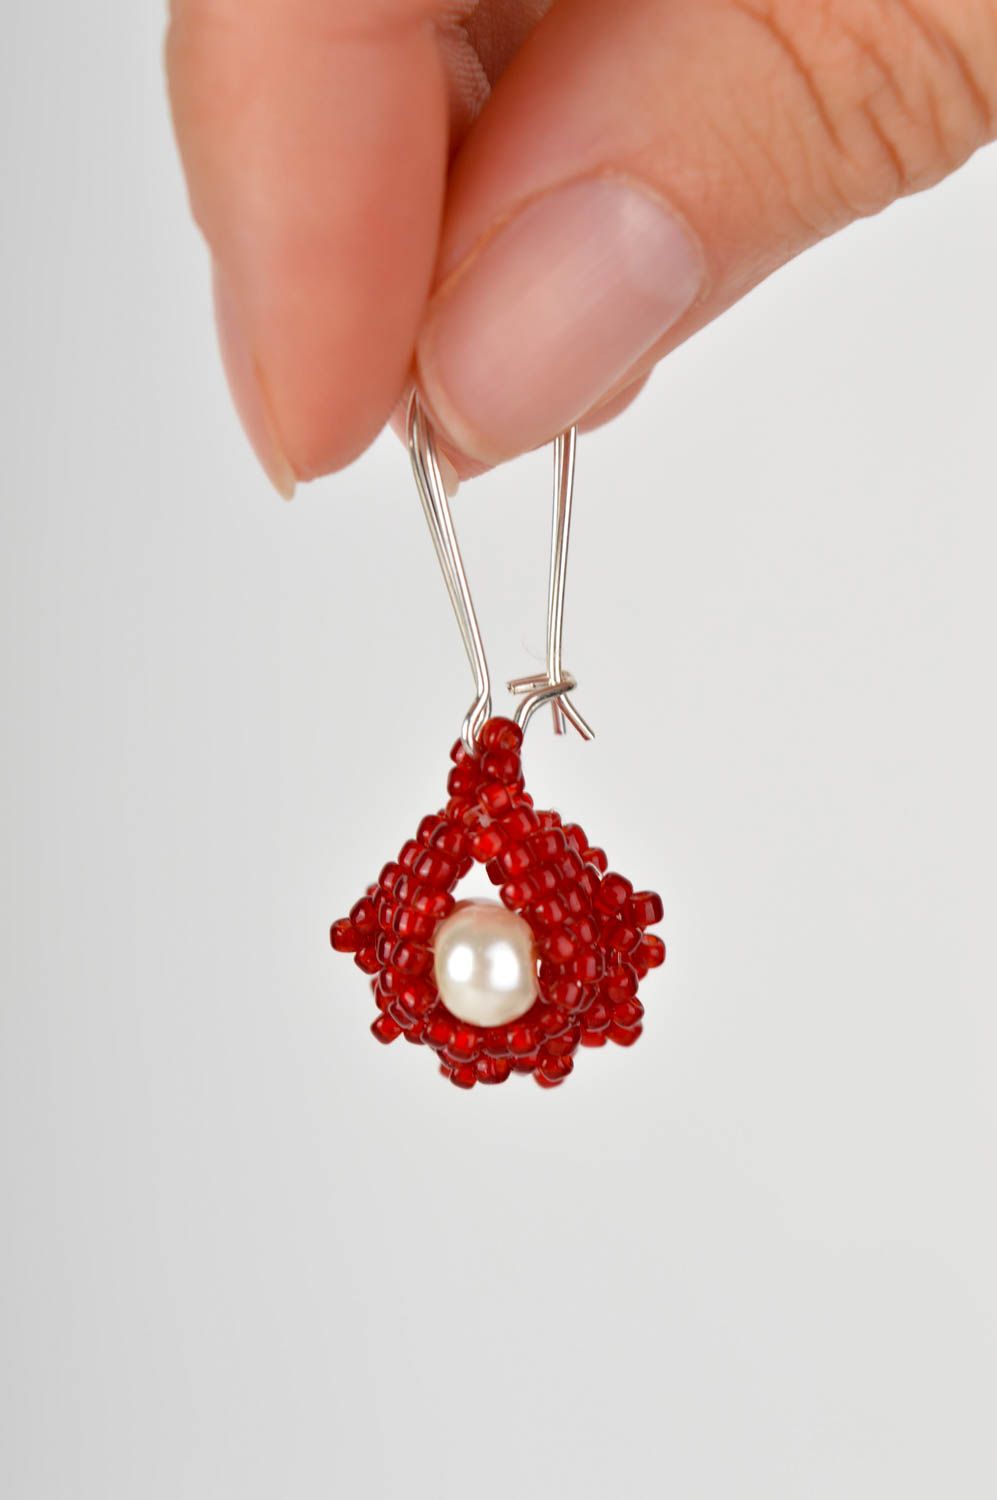 Handmade festive jewelry unusual cute accessory red earrings gift for her photo 5